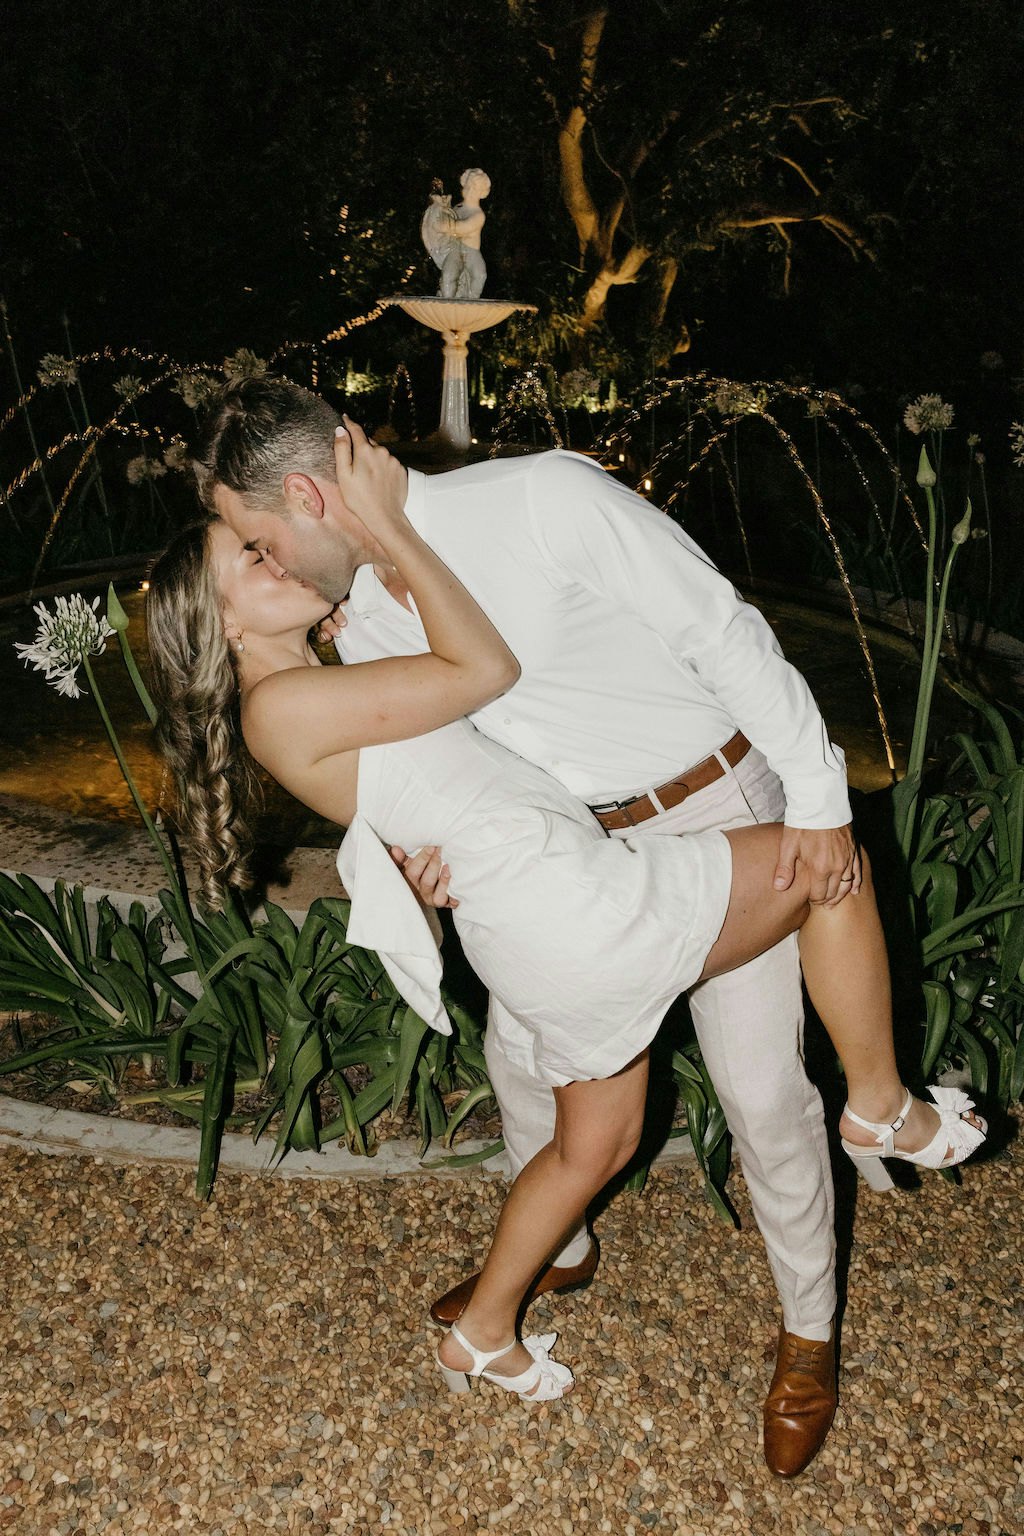 Bride and groom kissing in front of fountain